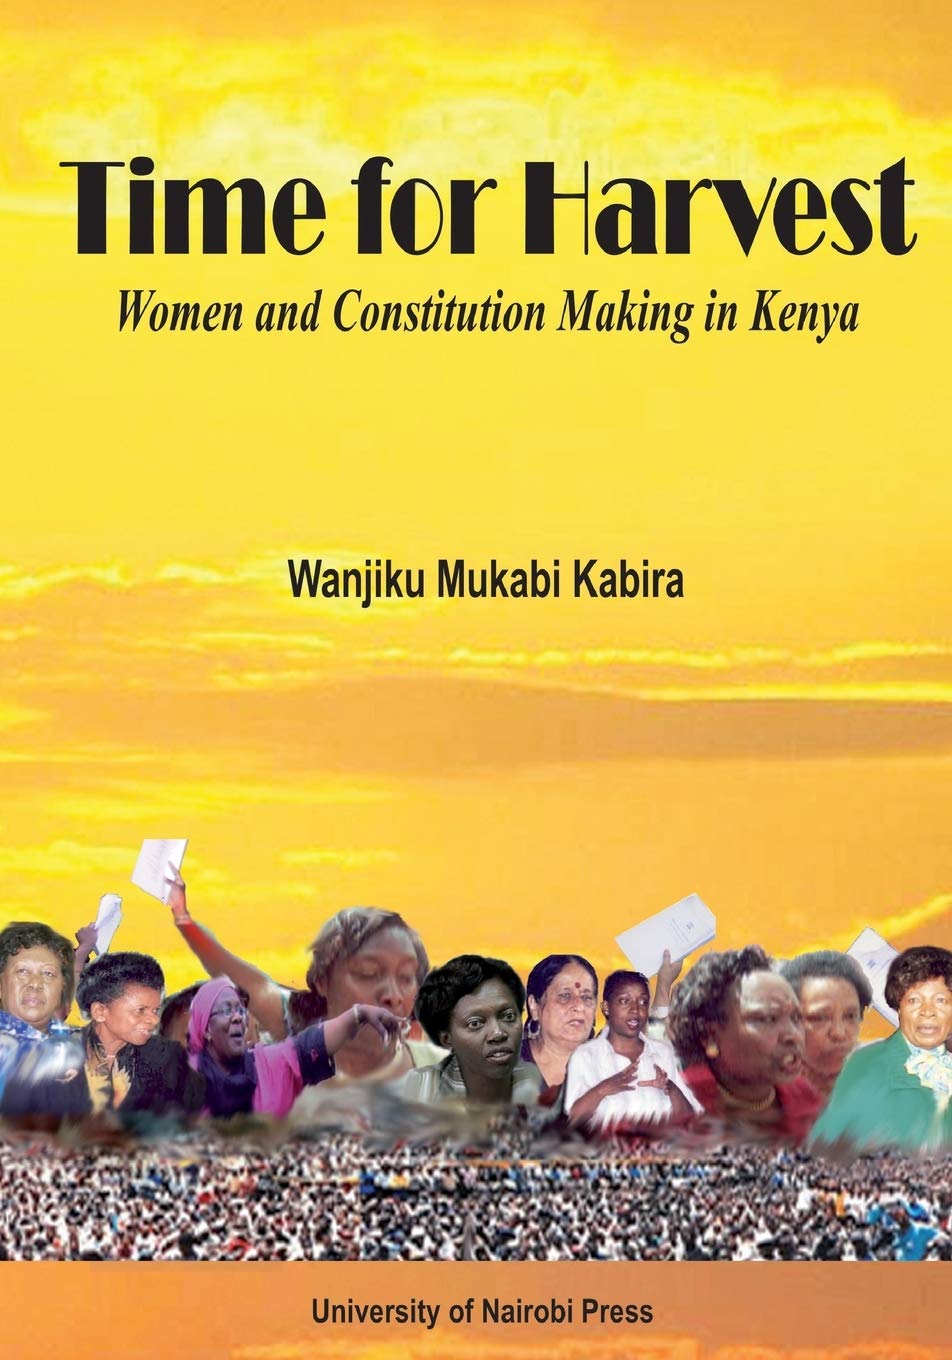 Time for Harvest Women and Constitution Making in Kenya